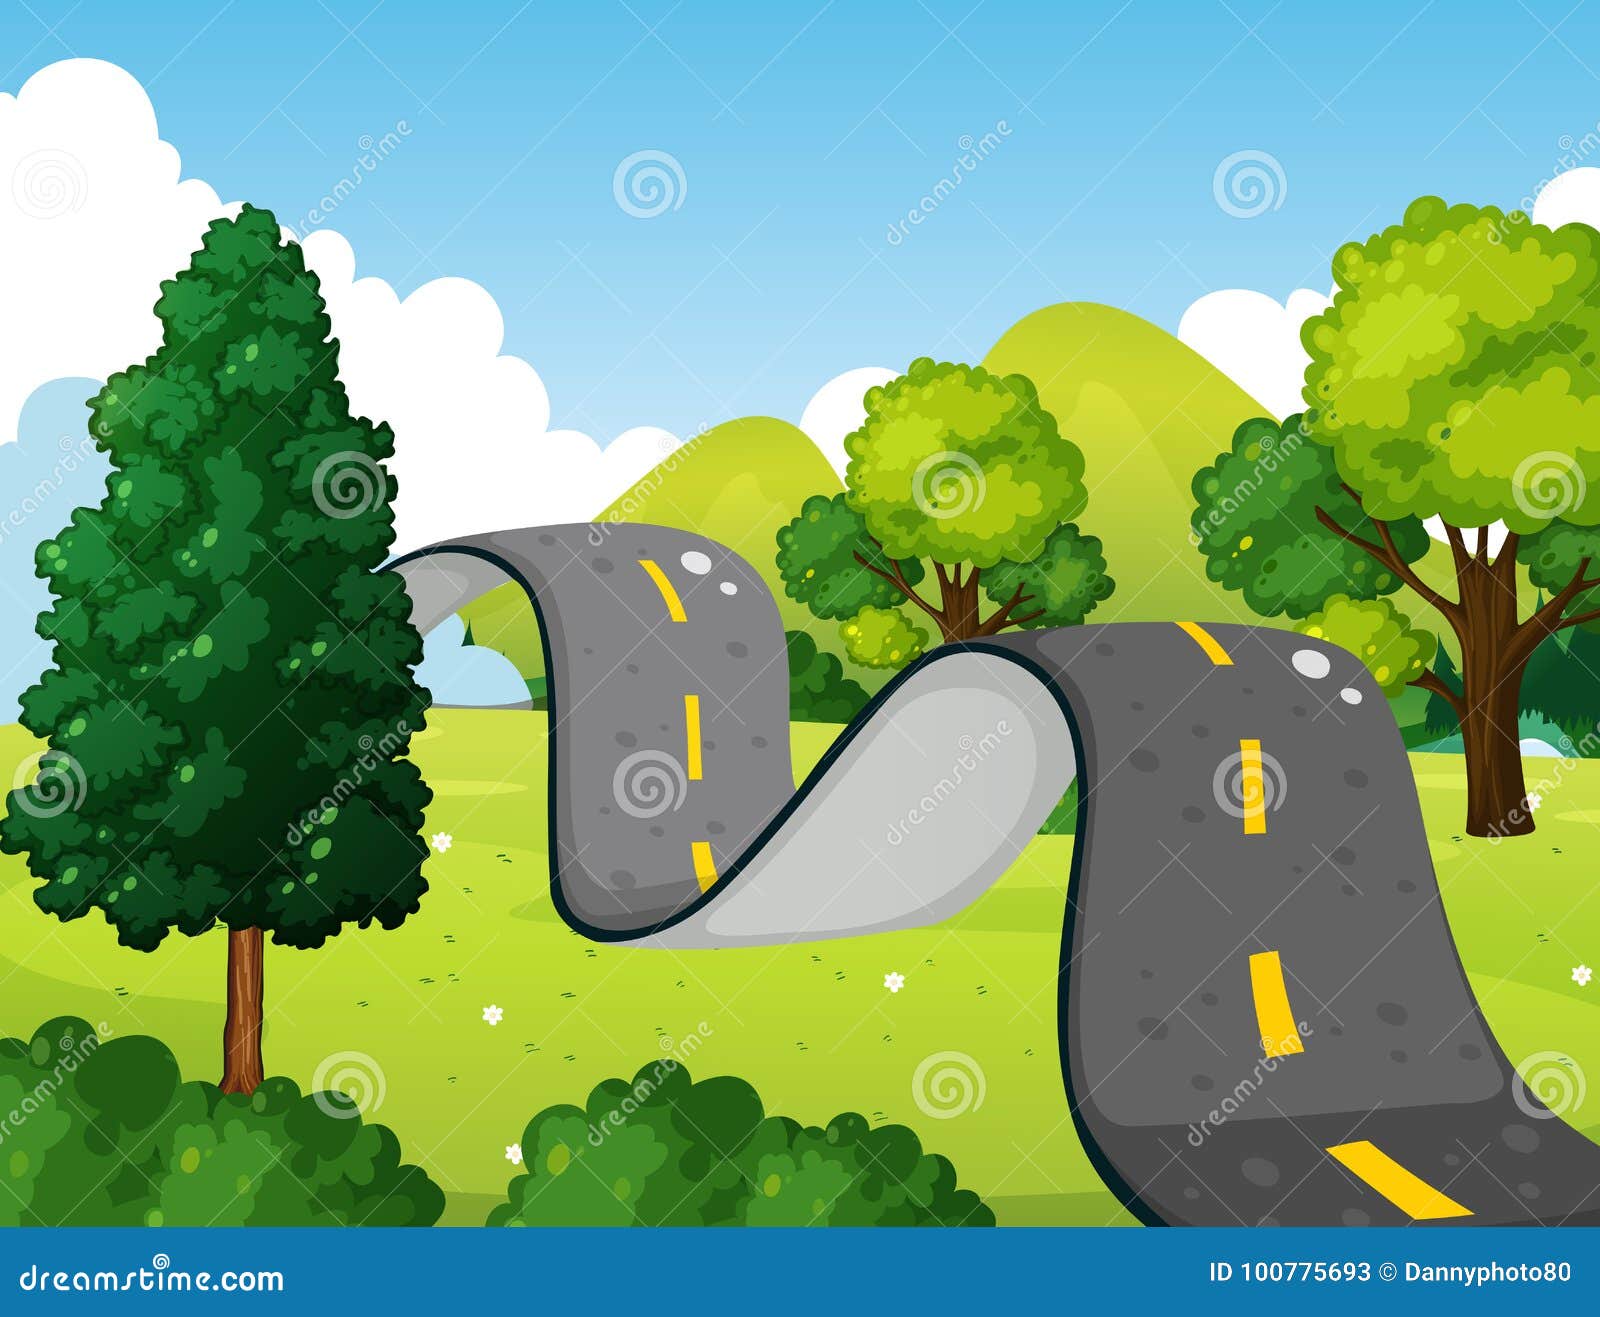 Scene With Bumpy Road In The Park Stock Vector Illustration Of Scene Drawing